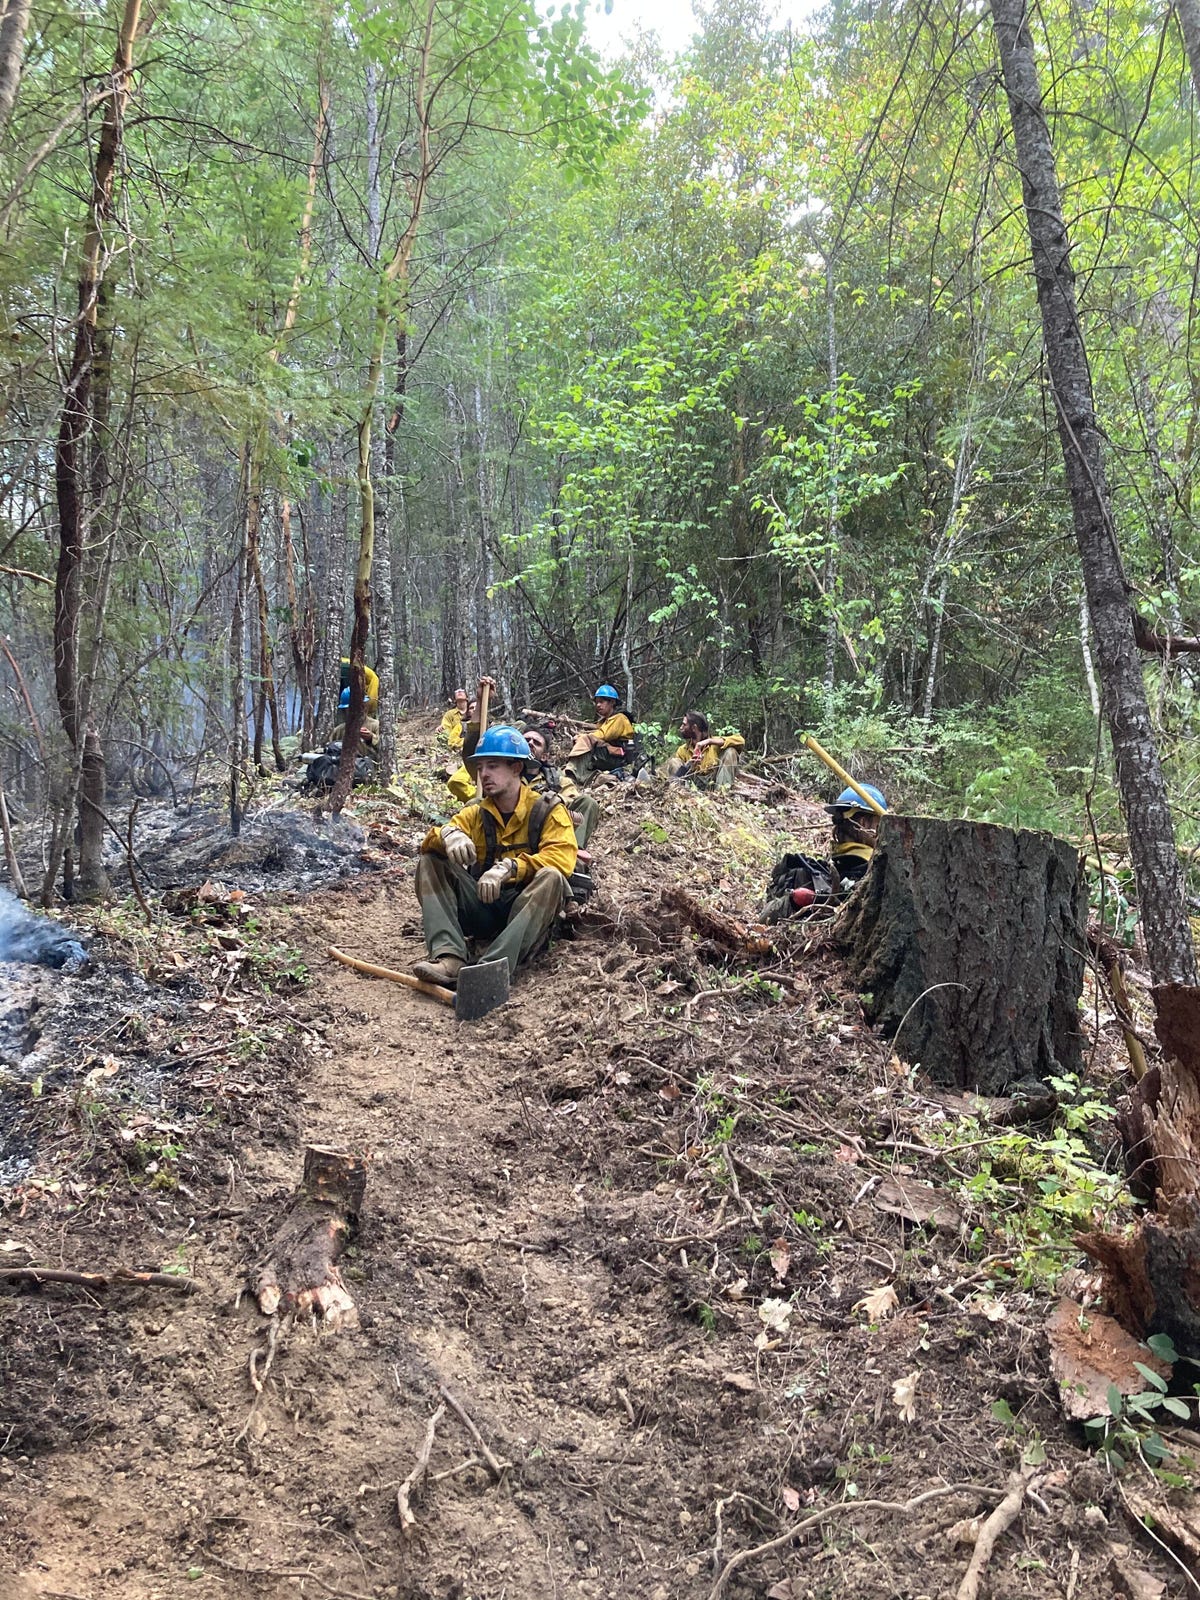 Carson Hotshots rest on a trail after fighting a wildfire